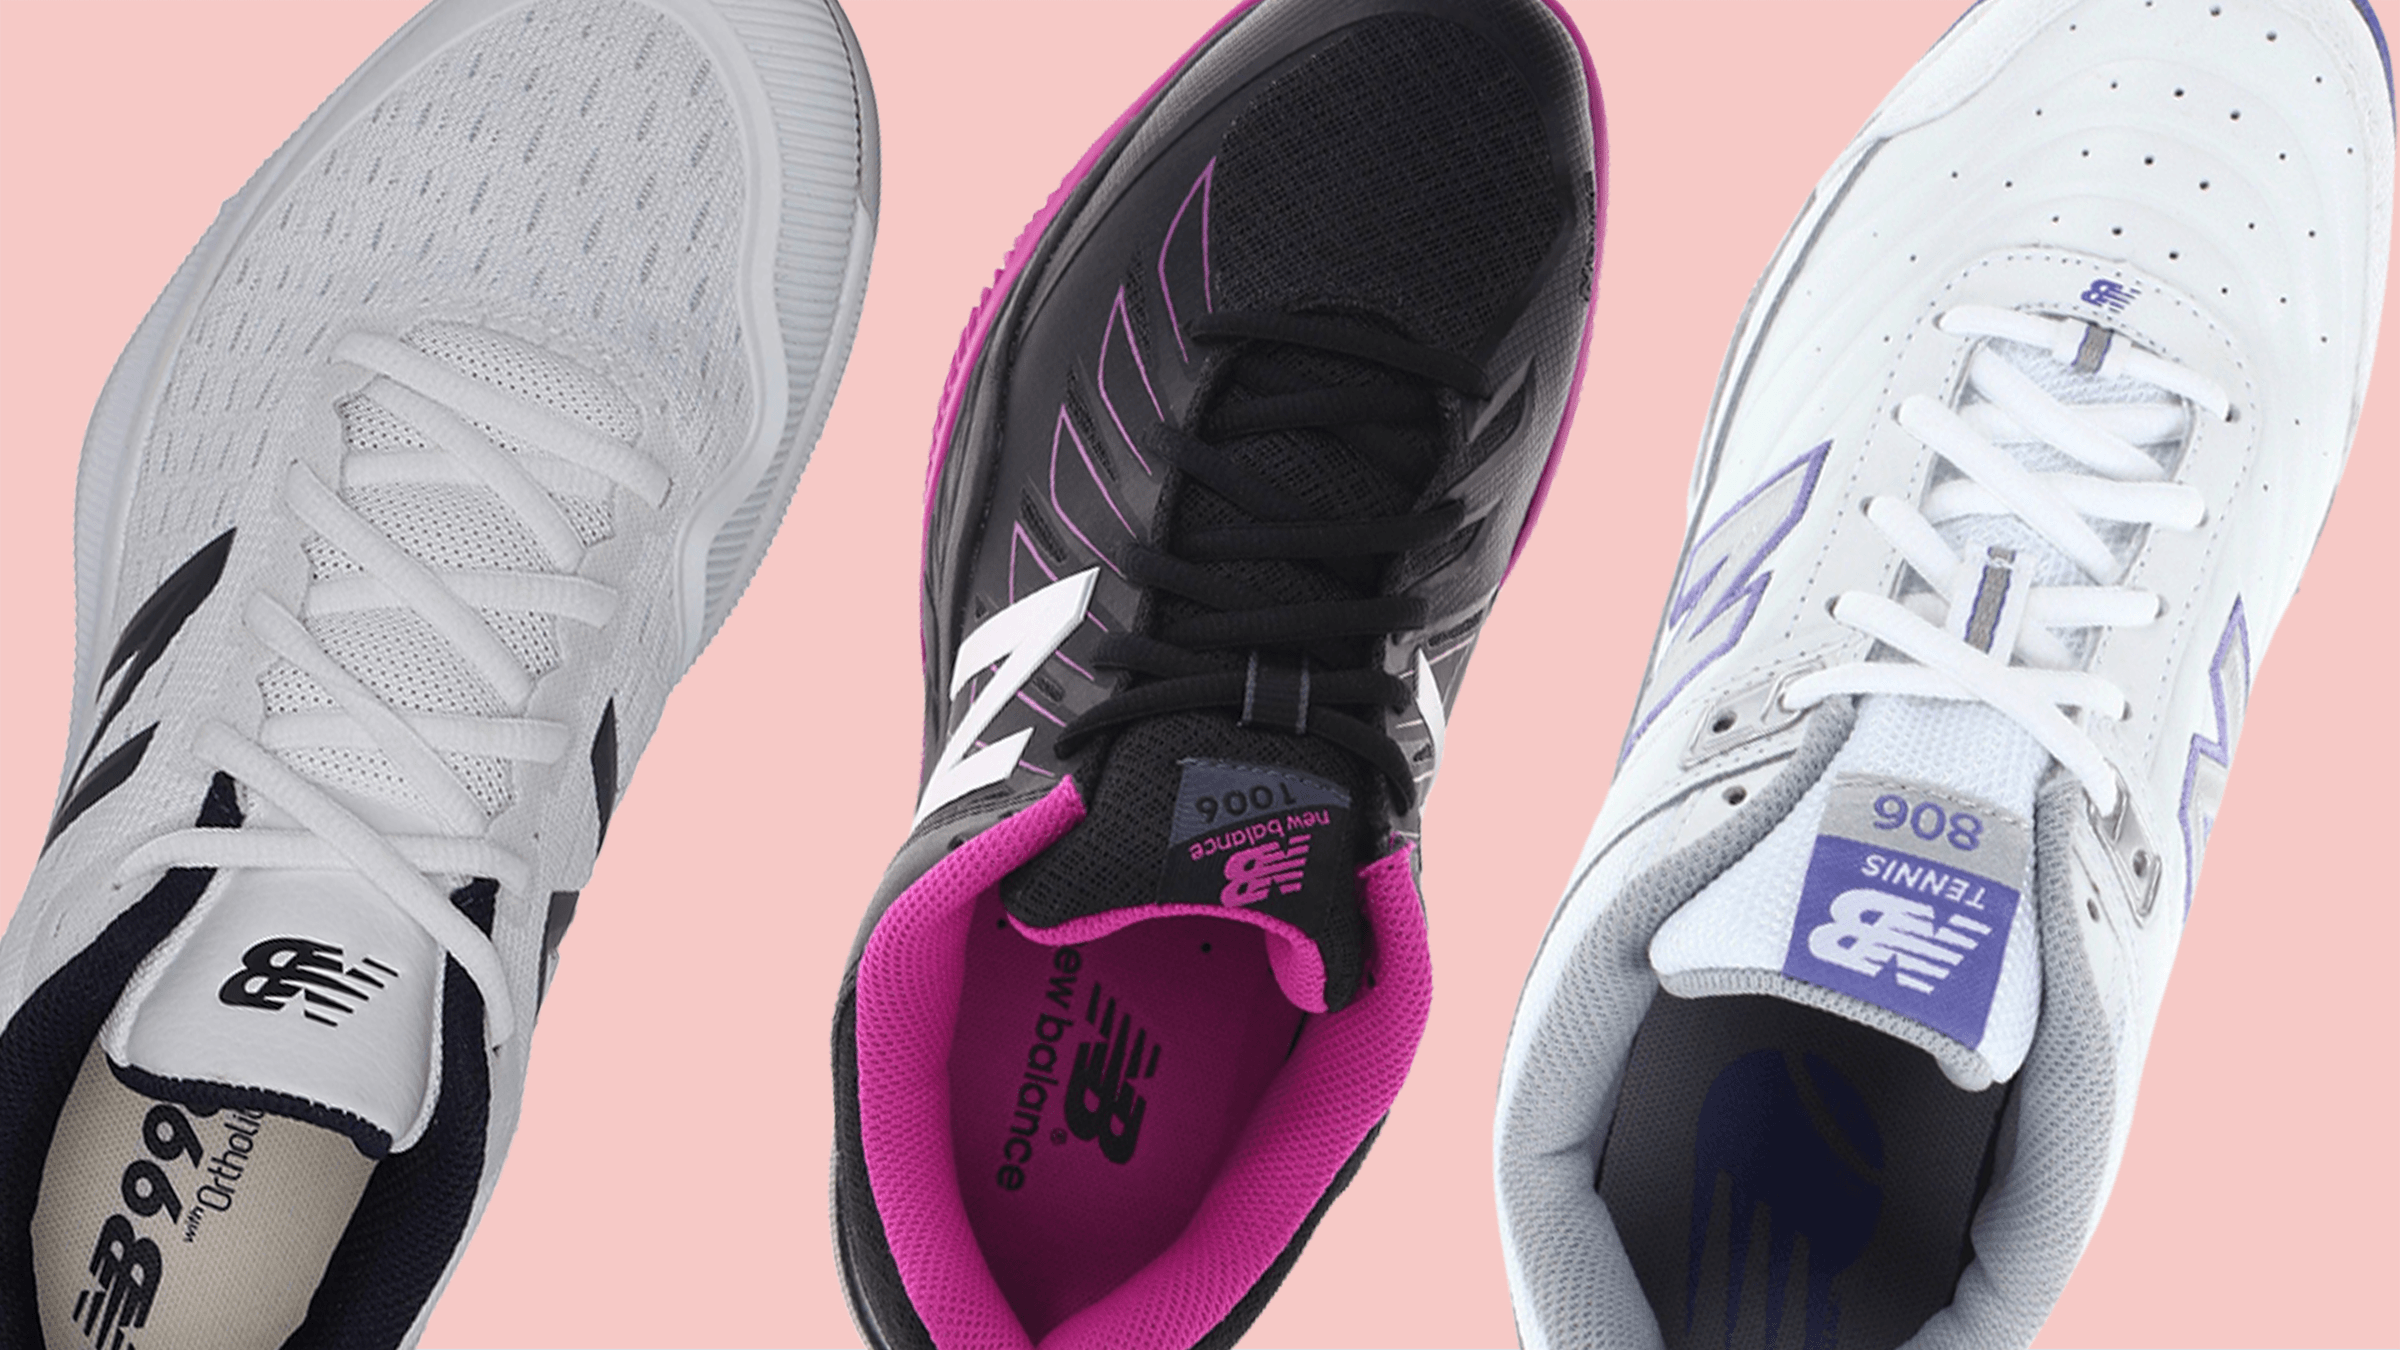 6 Best New Balance Tennis Shoes For Women in 2022